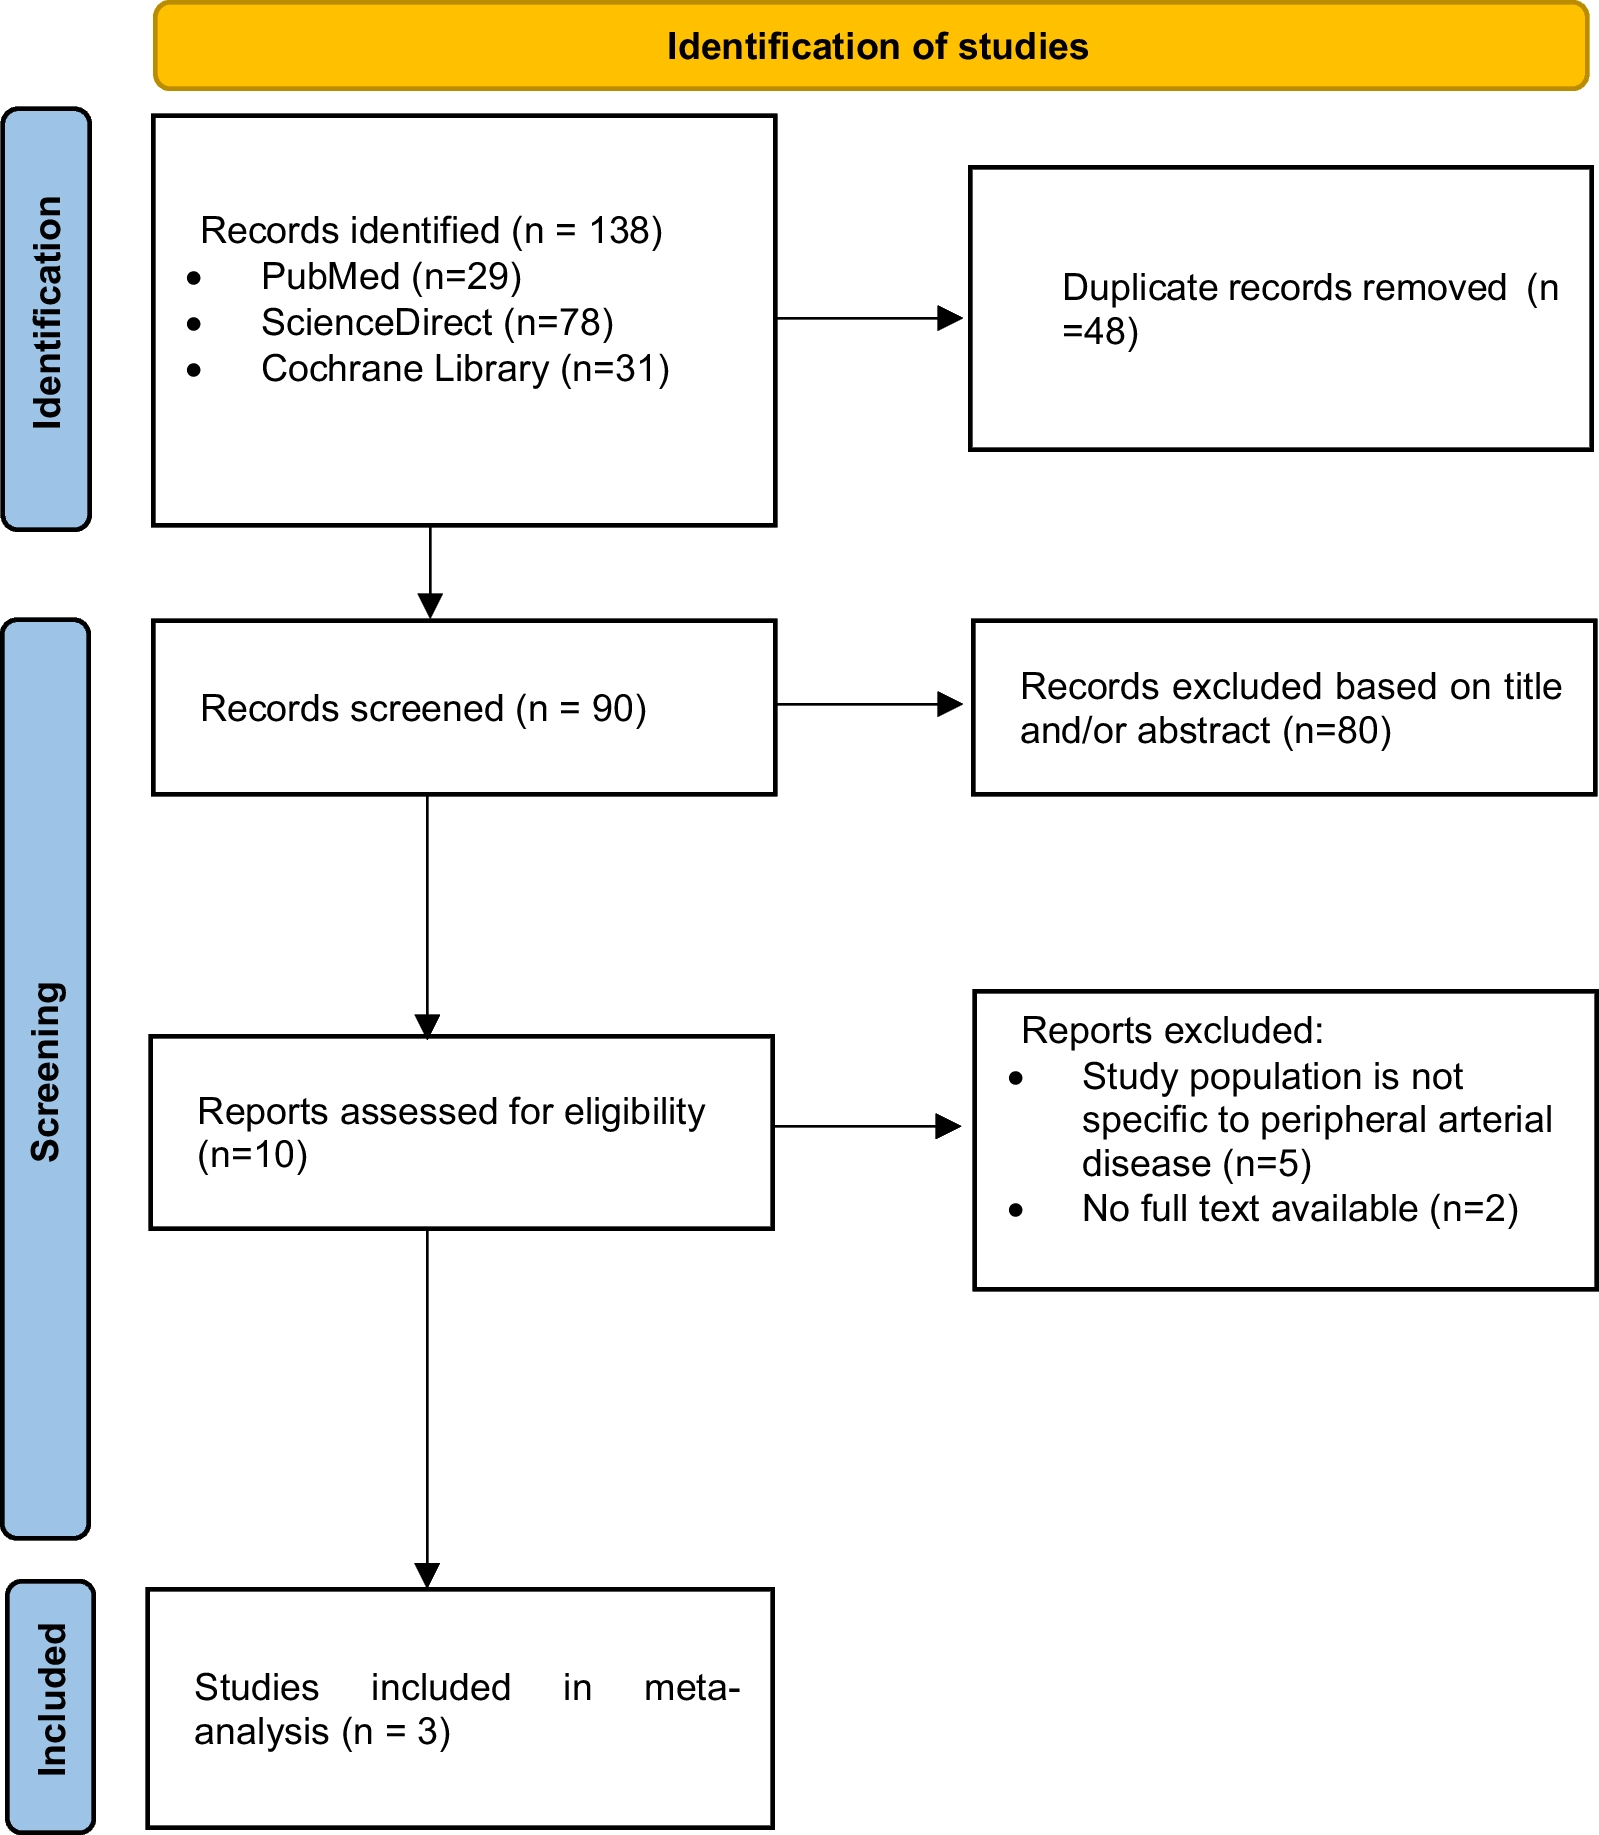 New insight of the efficacy trimetazidine in patients with peripheral arterial disease: a meta-analysis